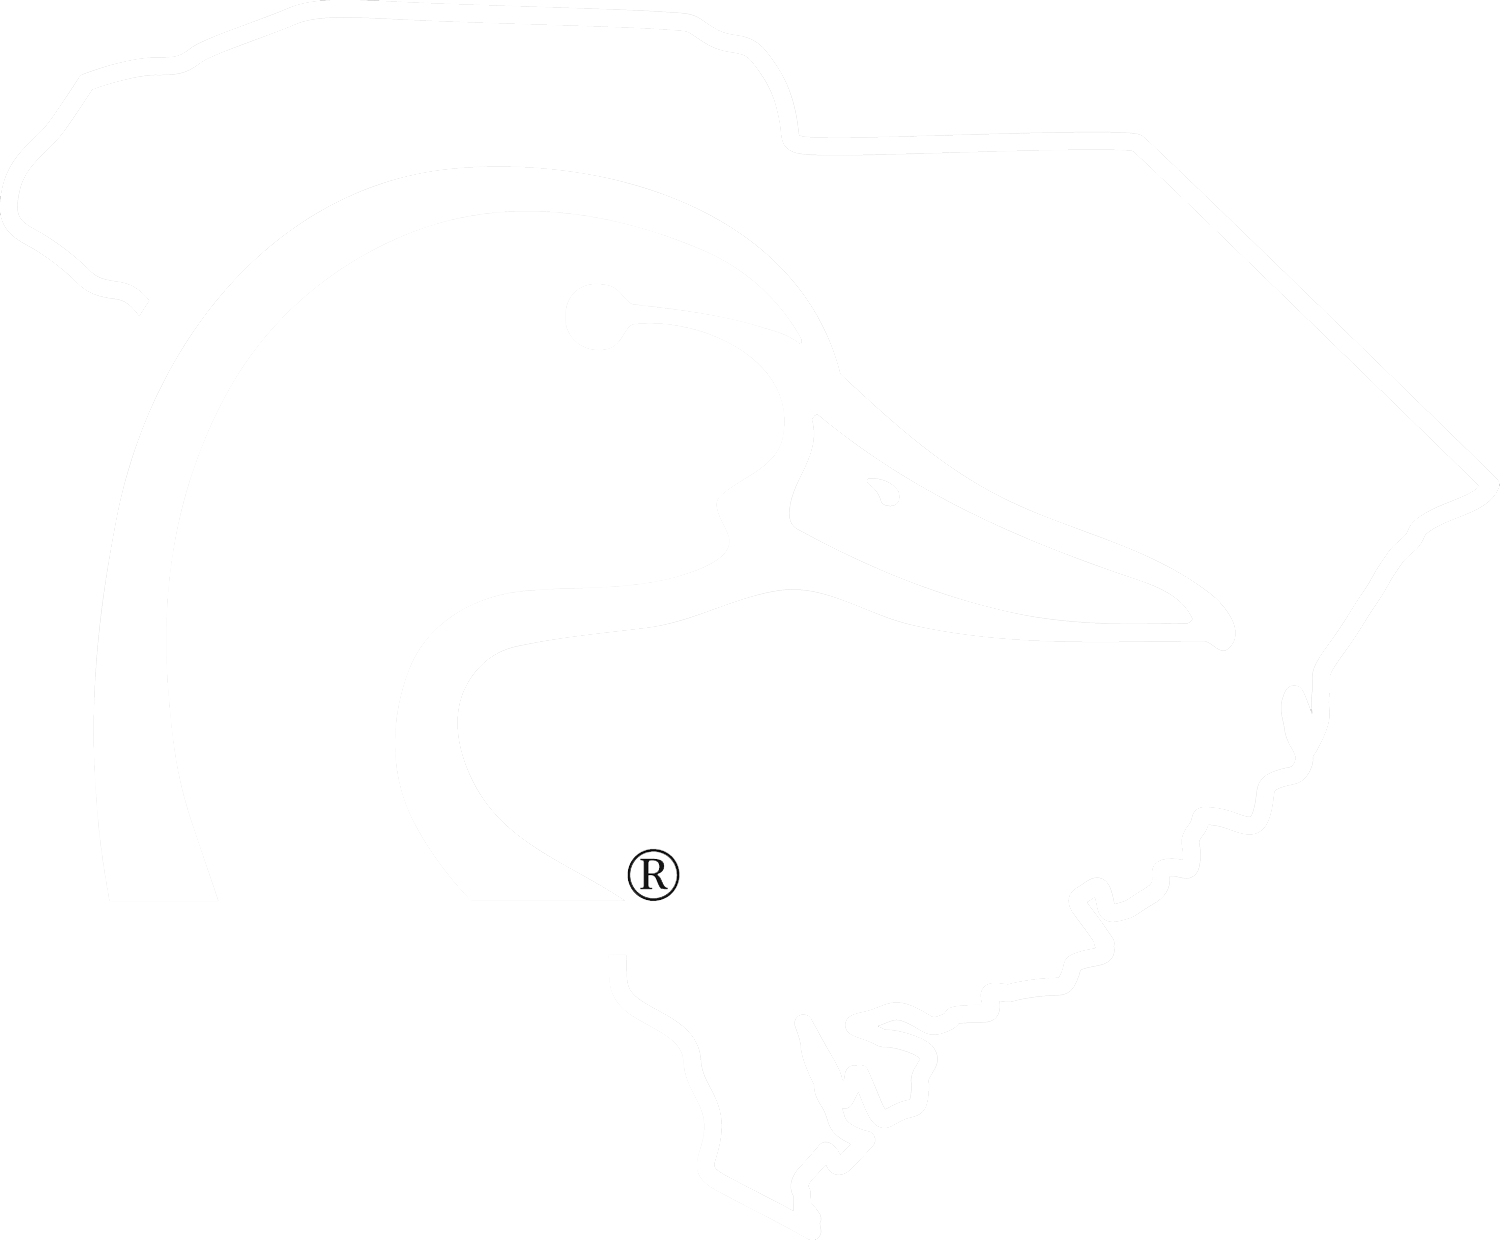 Ducks Unlimited Decal